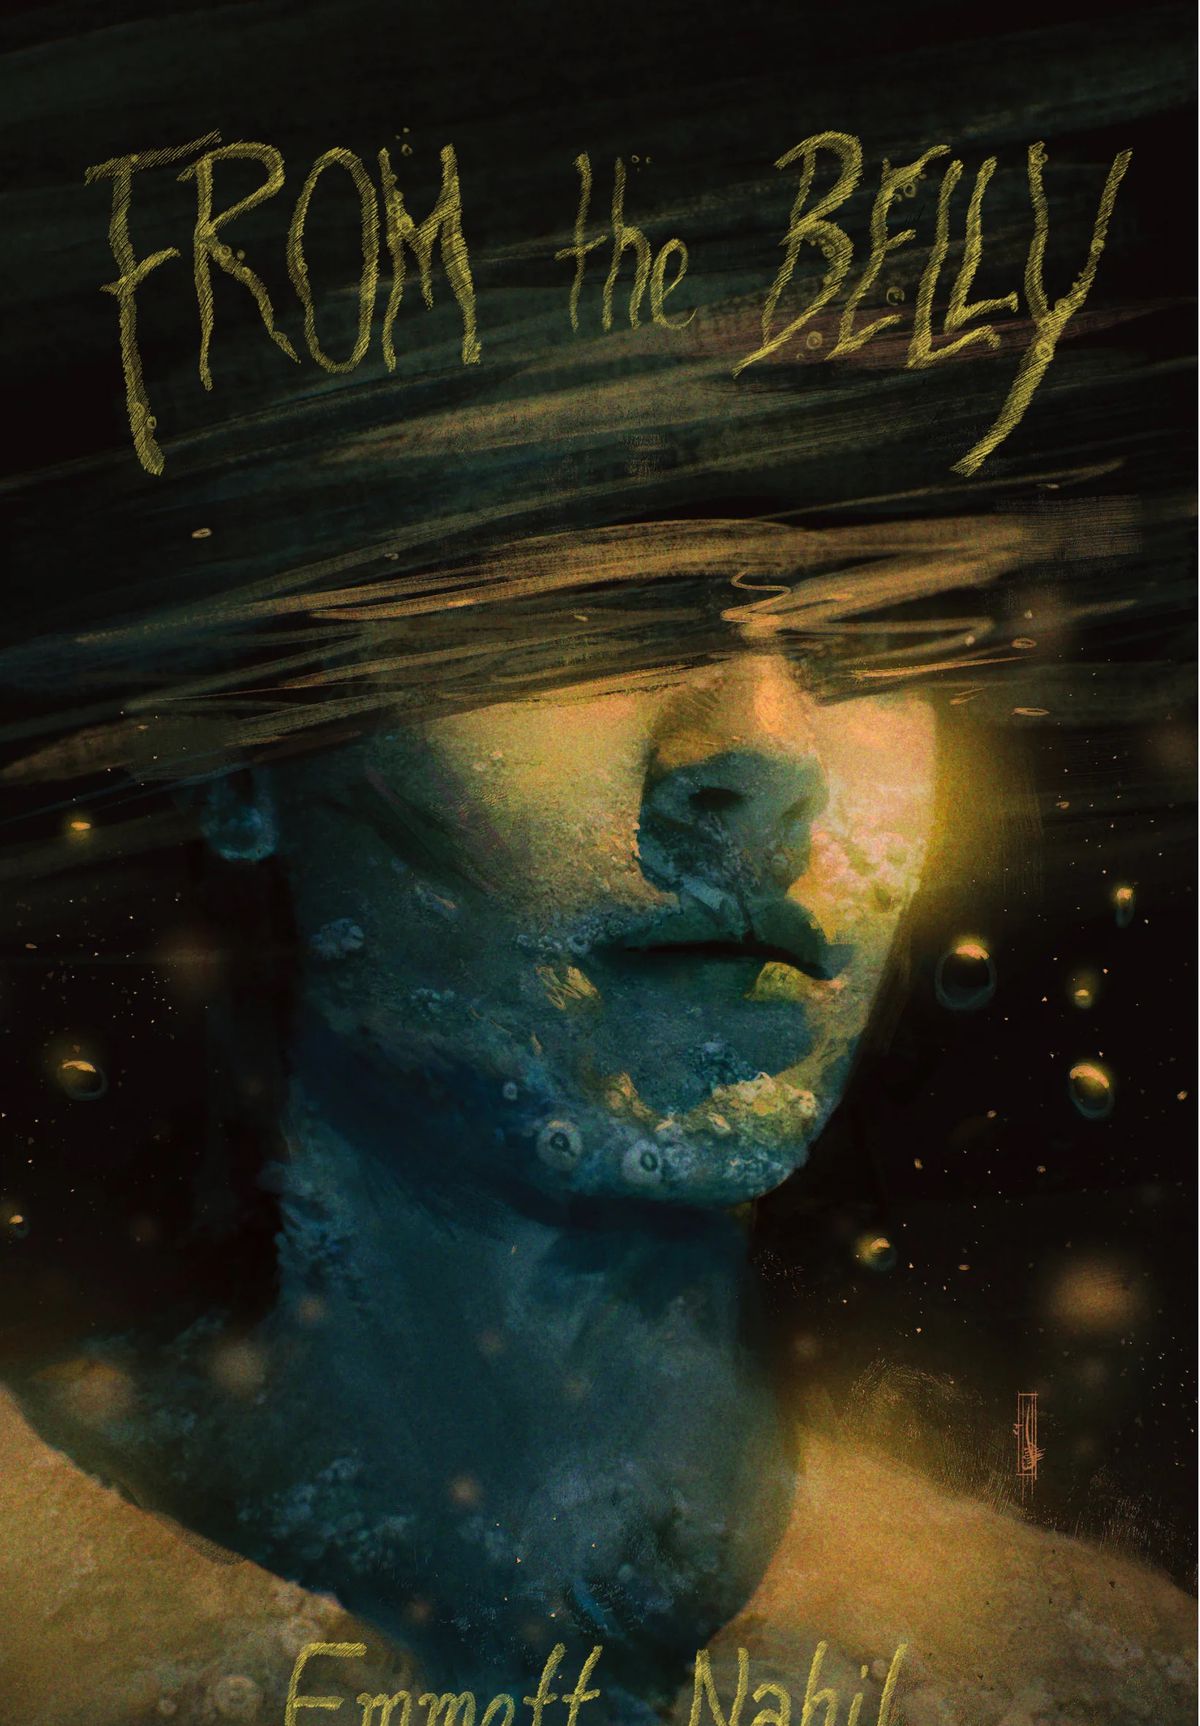 From the Belly’s cover shows a person’s face covered in barnacles with their eyes blurred out.